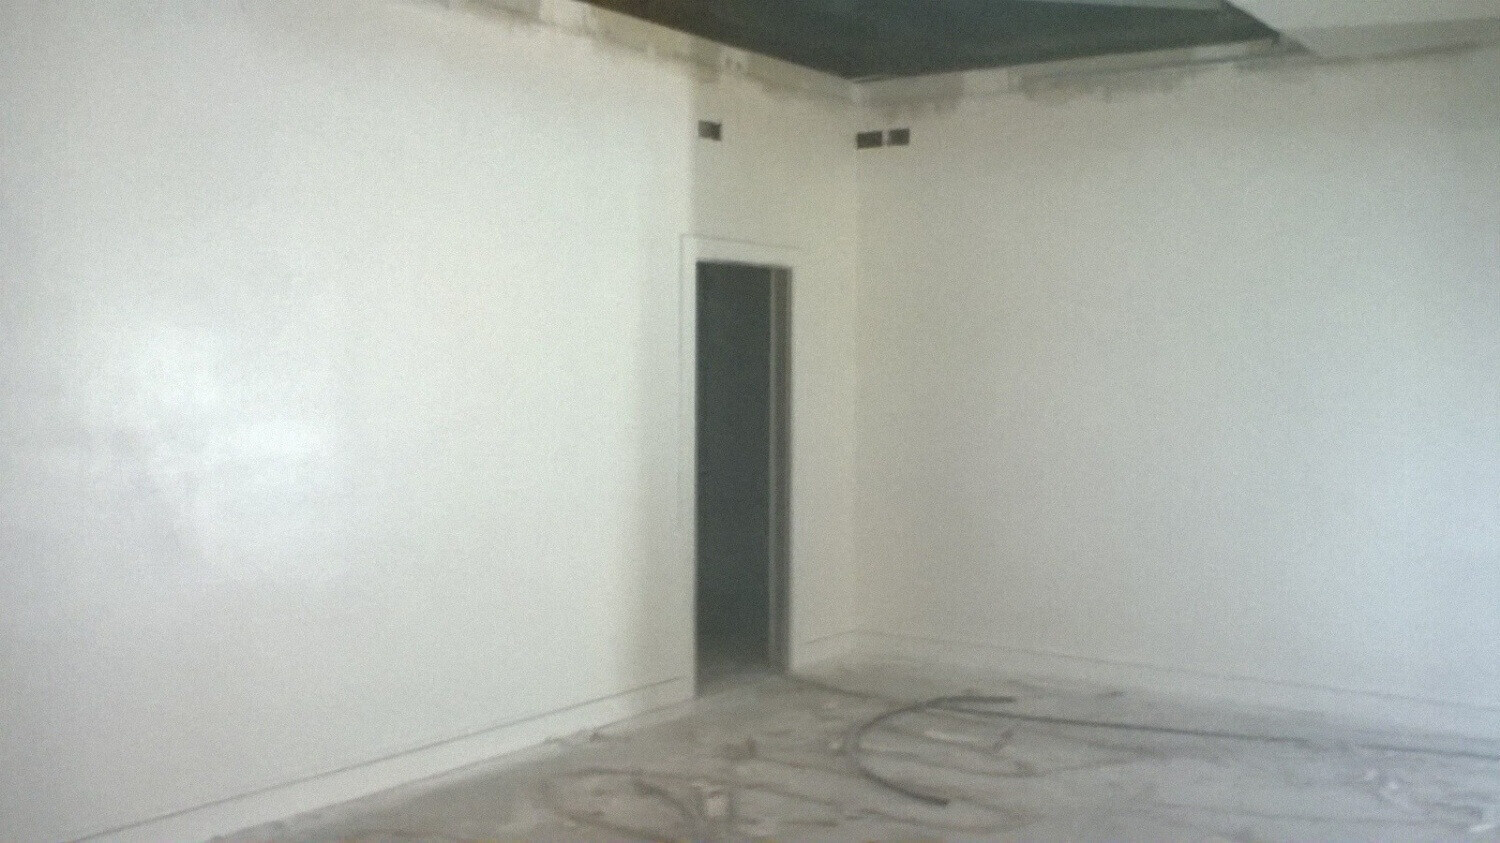 Wall Painting With Airless Paint spraying Luton, Bedfordshire